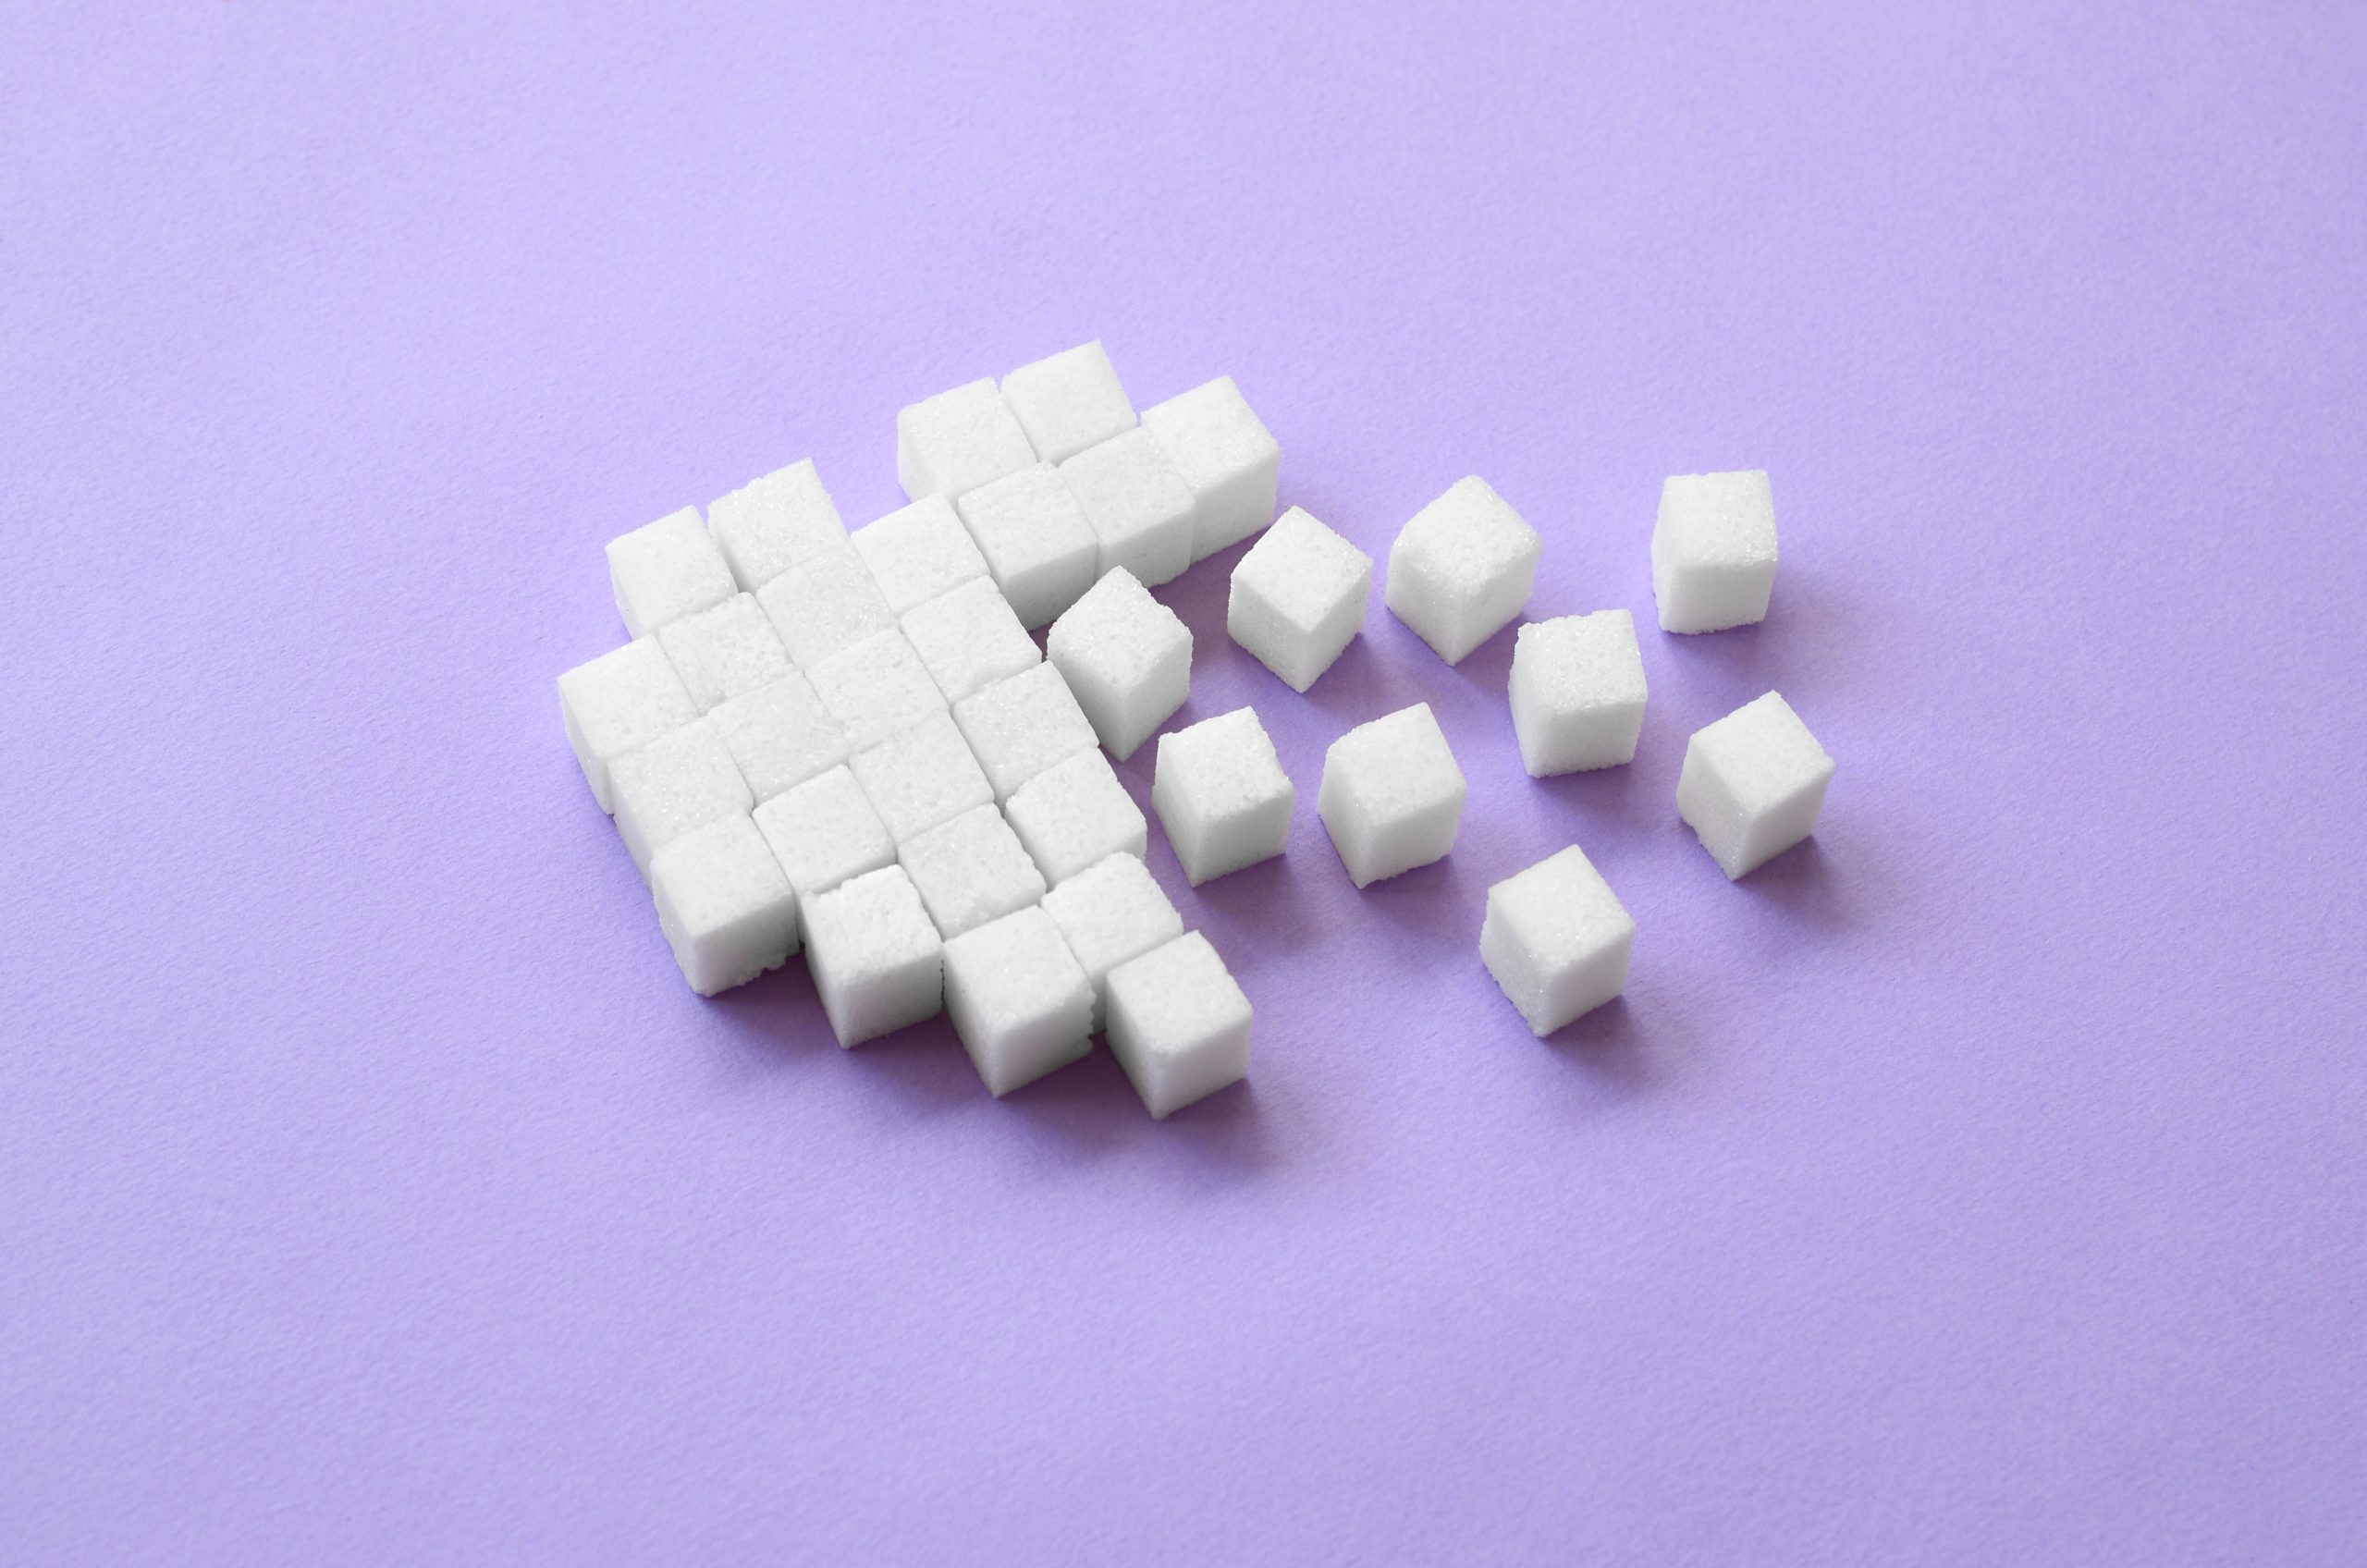 How does giving up sugar affect the body?